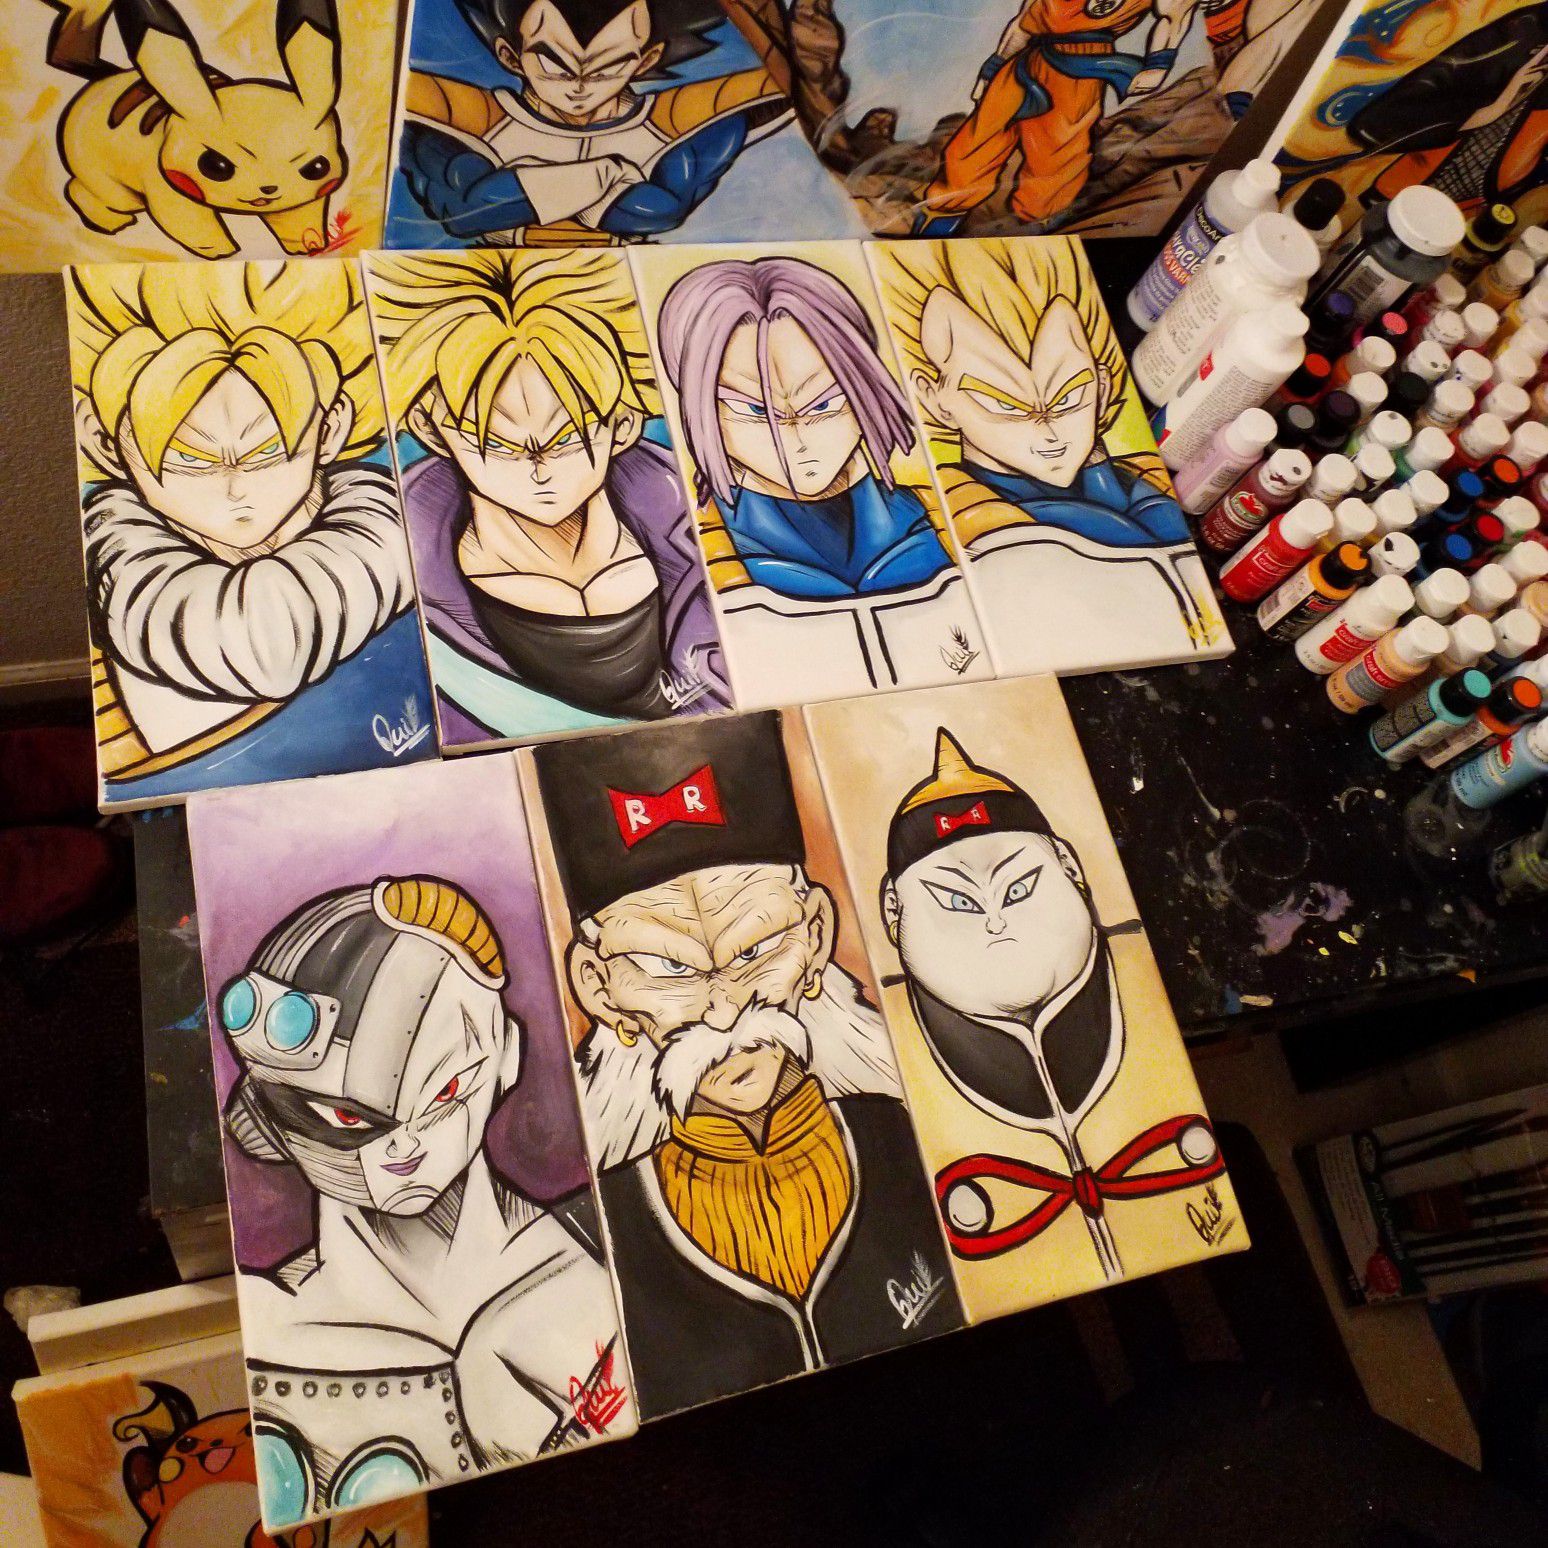 Future Trunks(Z) Saga Set! By Quil - Dragonball Z